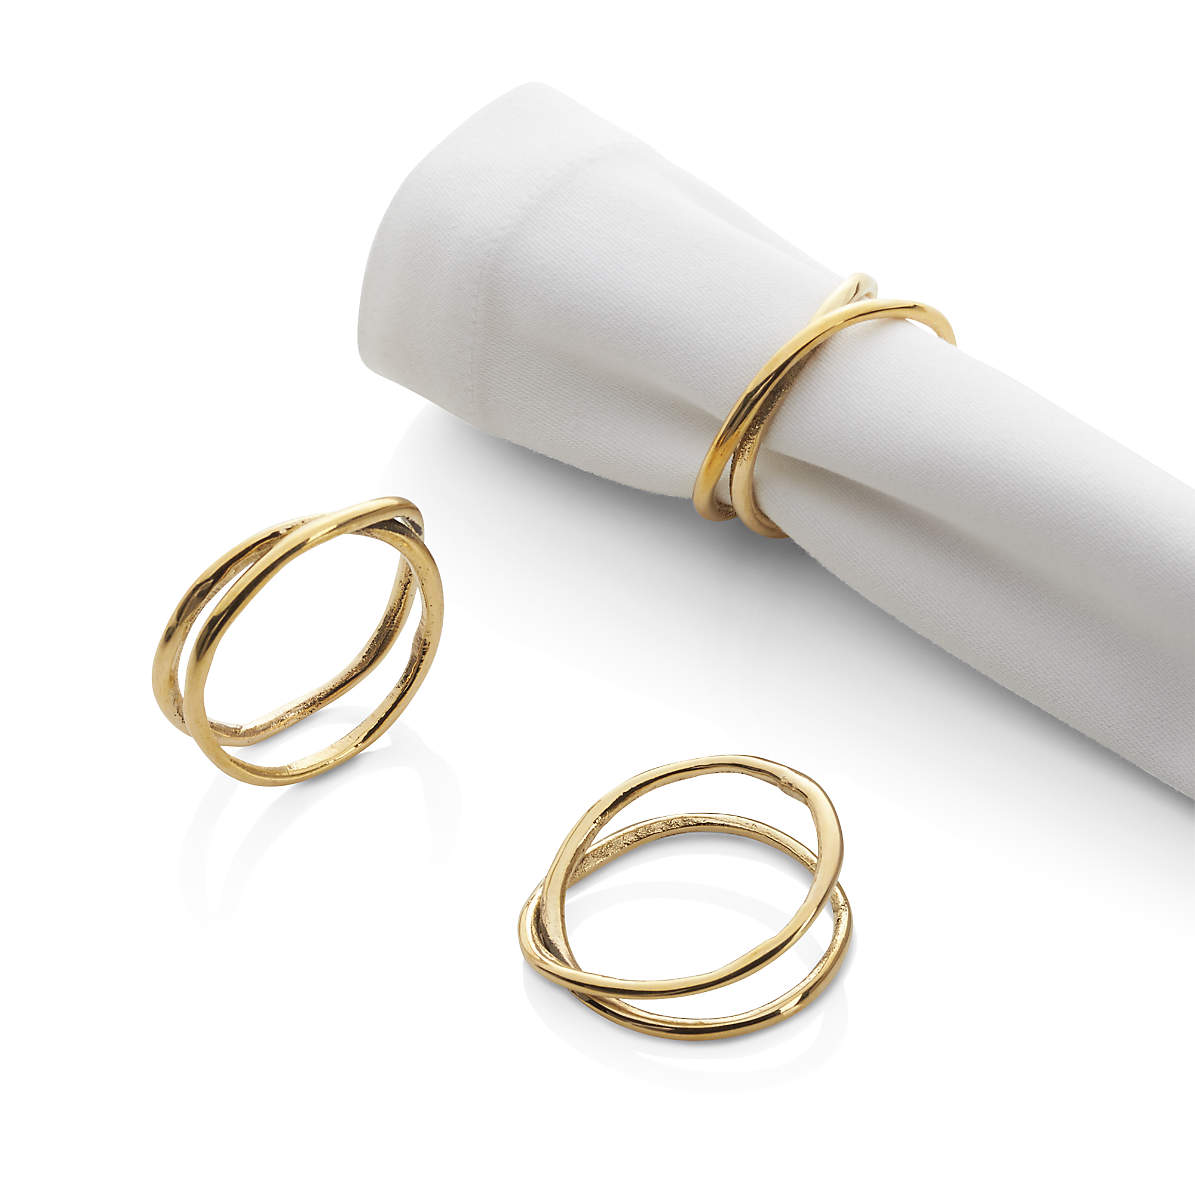 Gold METAL NAPKIN RINGS WITH CHAIN BAND XMAS DINNER EVENTS WEDDING PACK OF 6